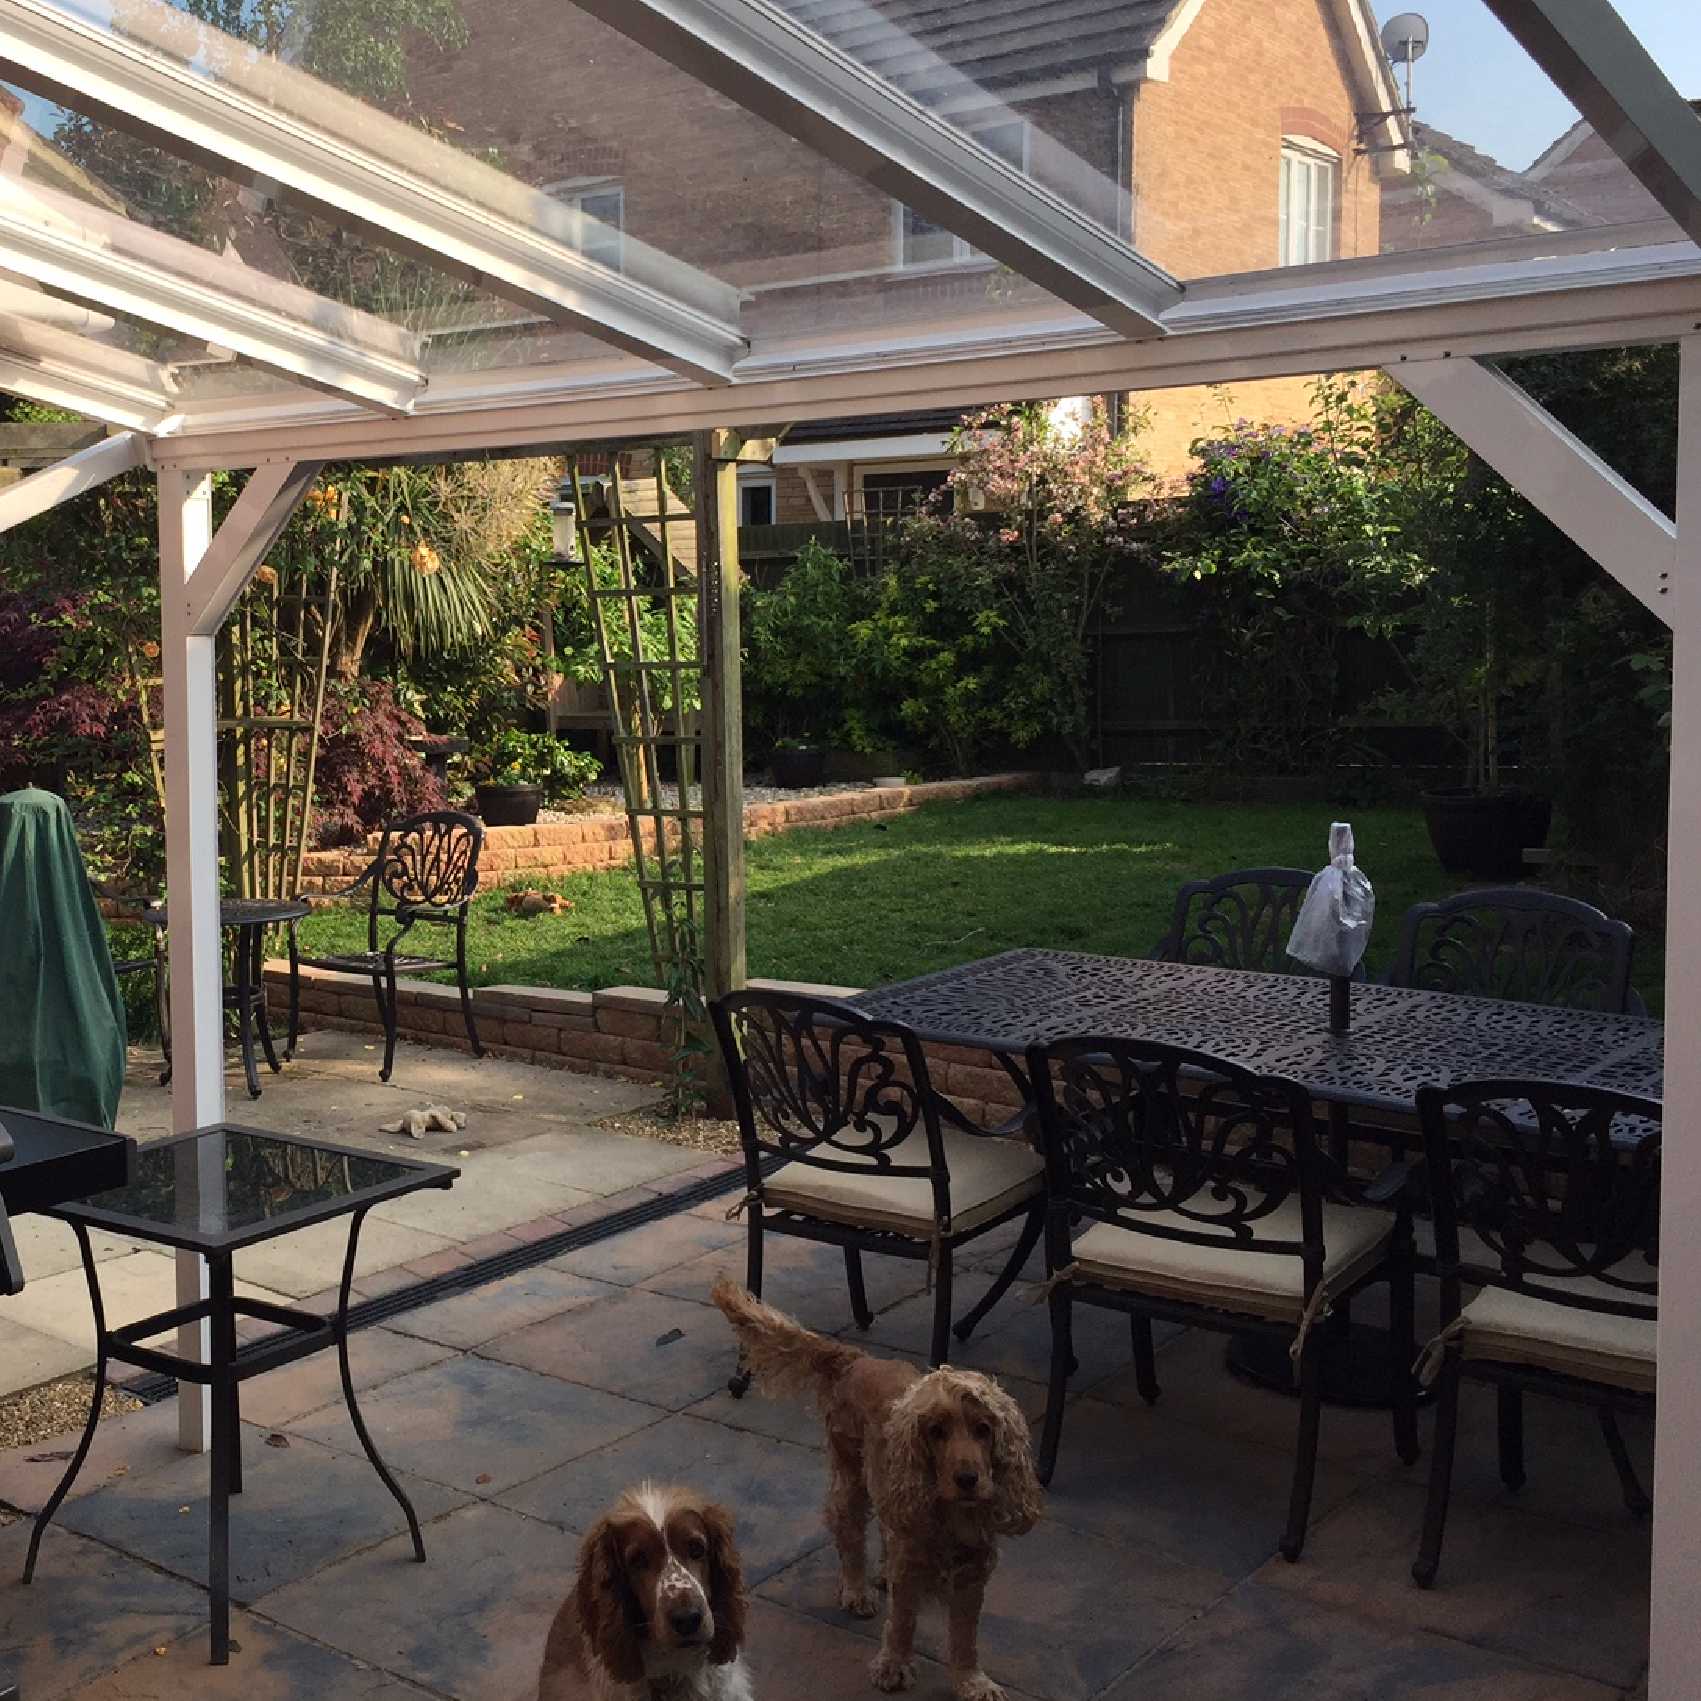 Affordable Omega Smart Lean-To Canopy, White UNGLAZED for 6mm Glazing - 8.4m (W) x 2.5m (P), (4) Supporting Posts